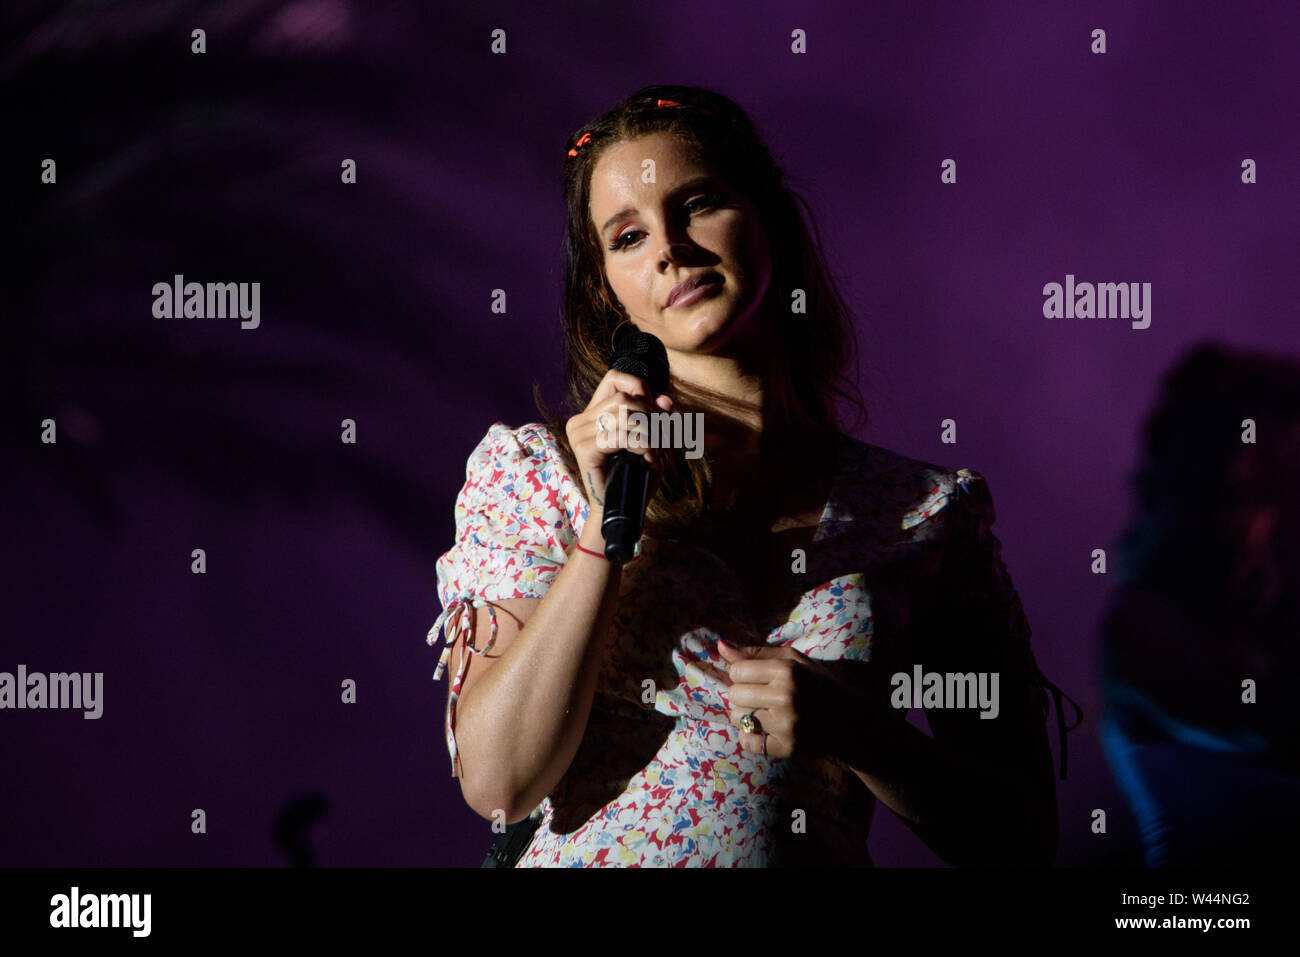 Benicassim, Spain. 19th July, 2019. Lana del Rey performs in concert at FIB 2019 Festival on July 19, 2019 in Benicassim, Spain. Credit: Christian Bertrand/Alamy Live News Stock Photo